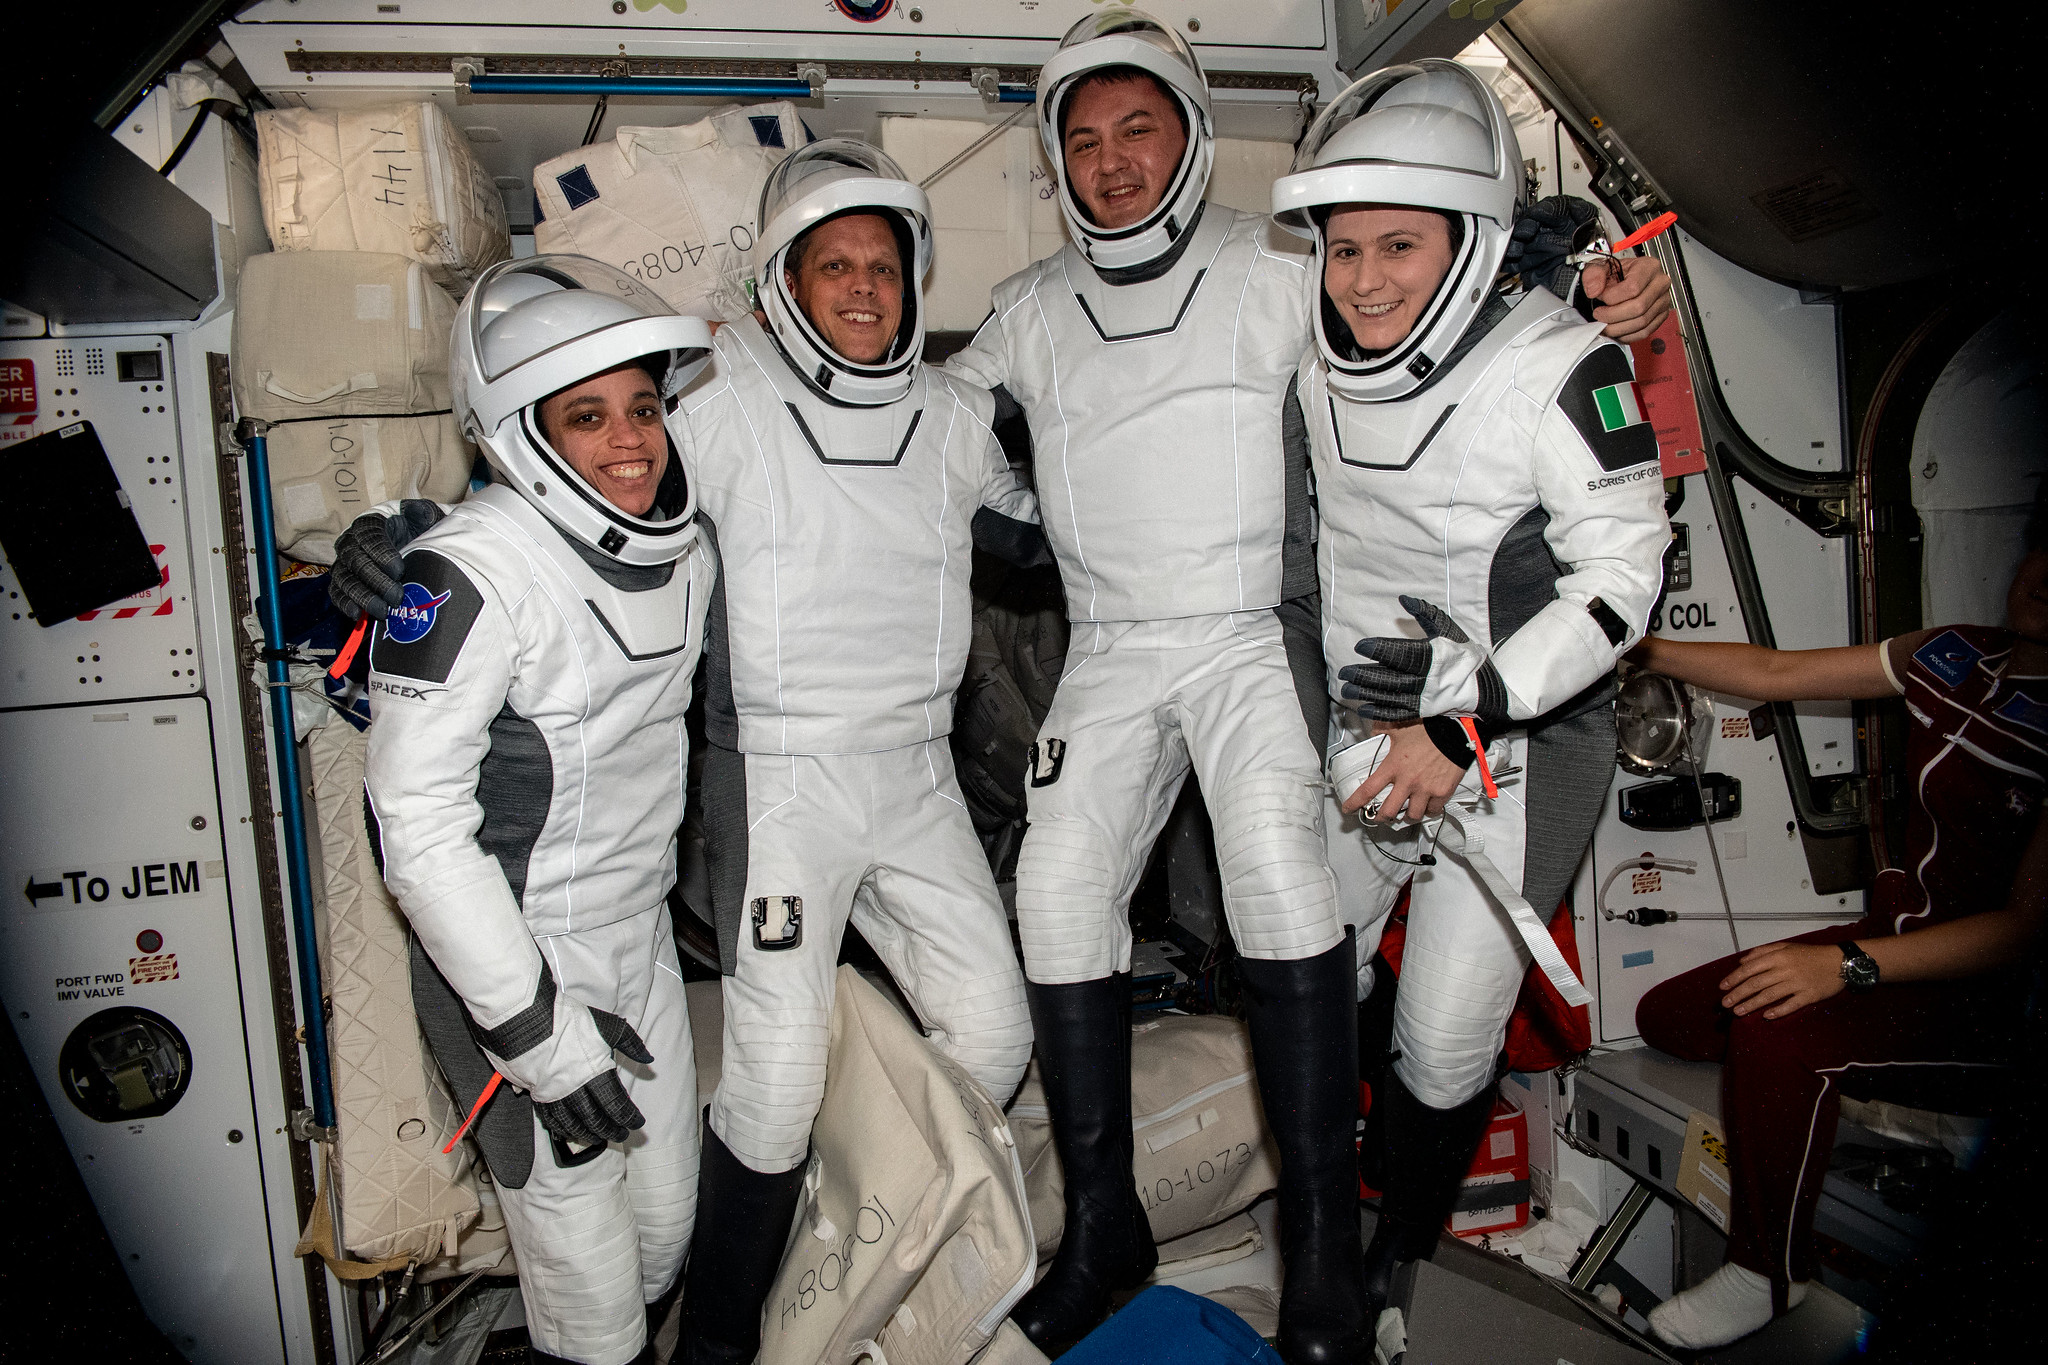 The SpaceX Crew-4 astronauts pose for a portrait in their pressure suits before boarding the Dragon Freedom crew ship, undocking from the International Space Station, and returning to Earth completing a 170-day space research mission.